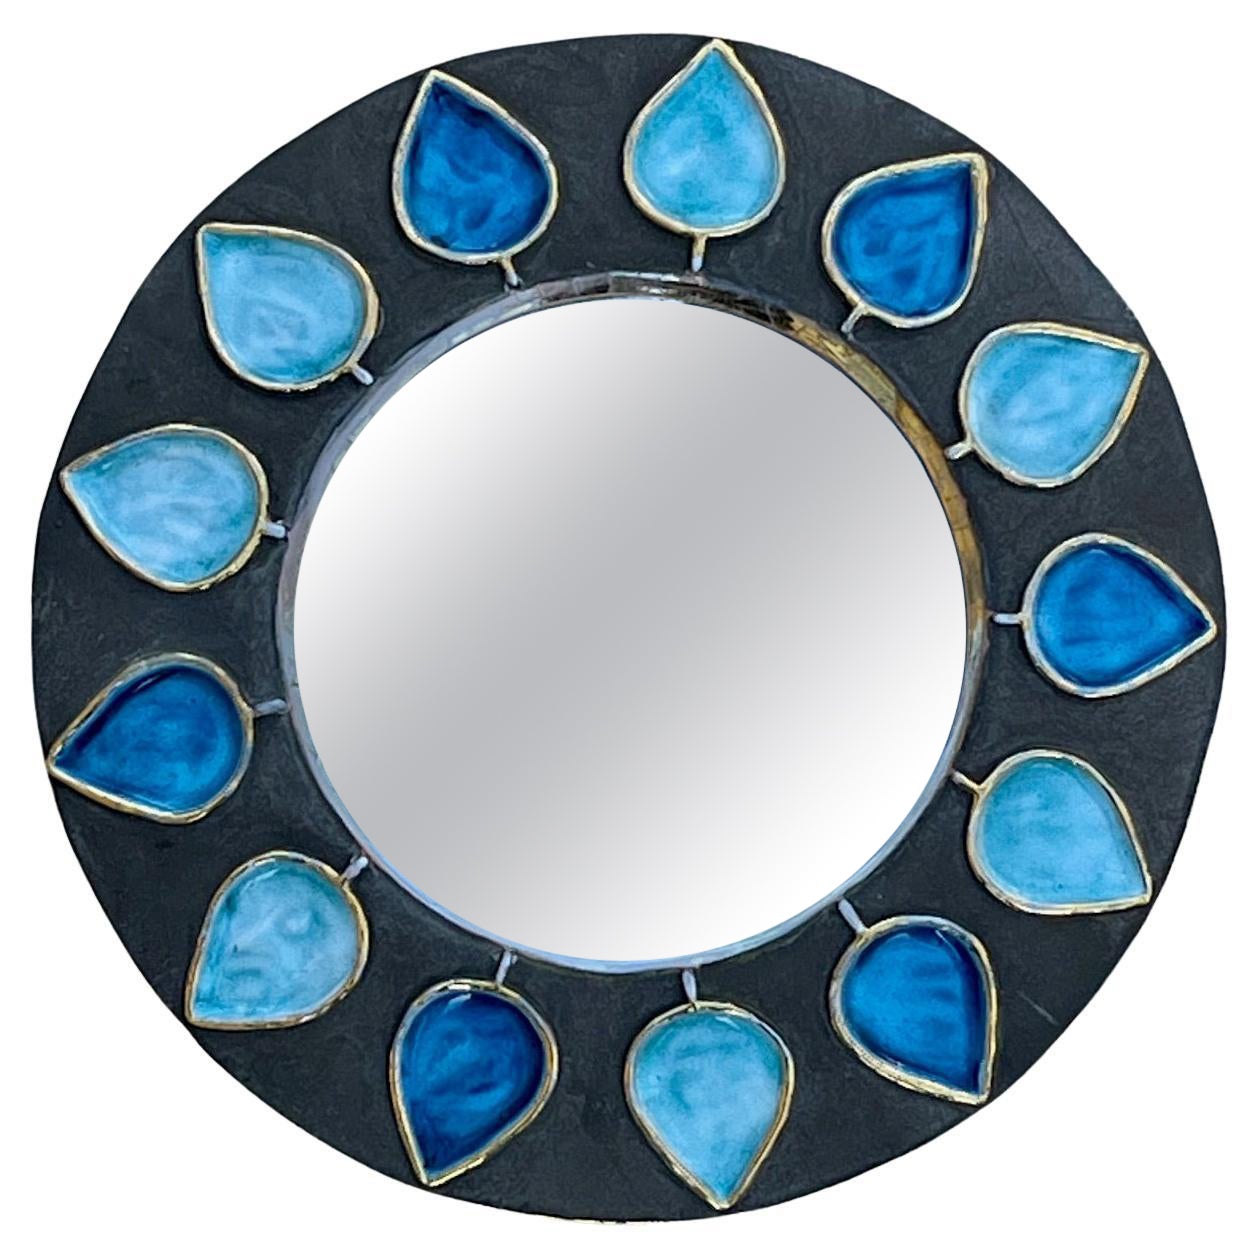 Ceramic Wall Mirror, " Piques" by Mithé Espelt, France, 1962 For Sale